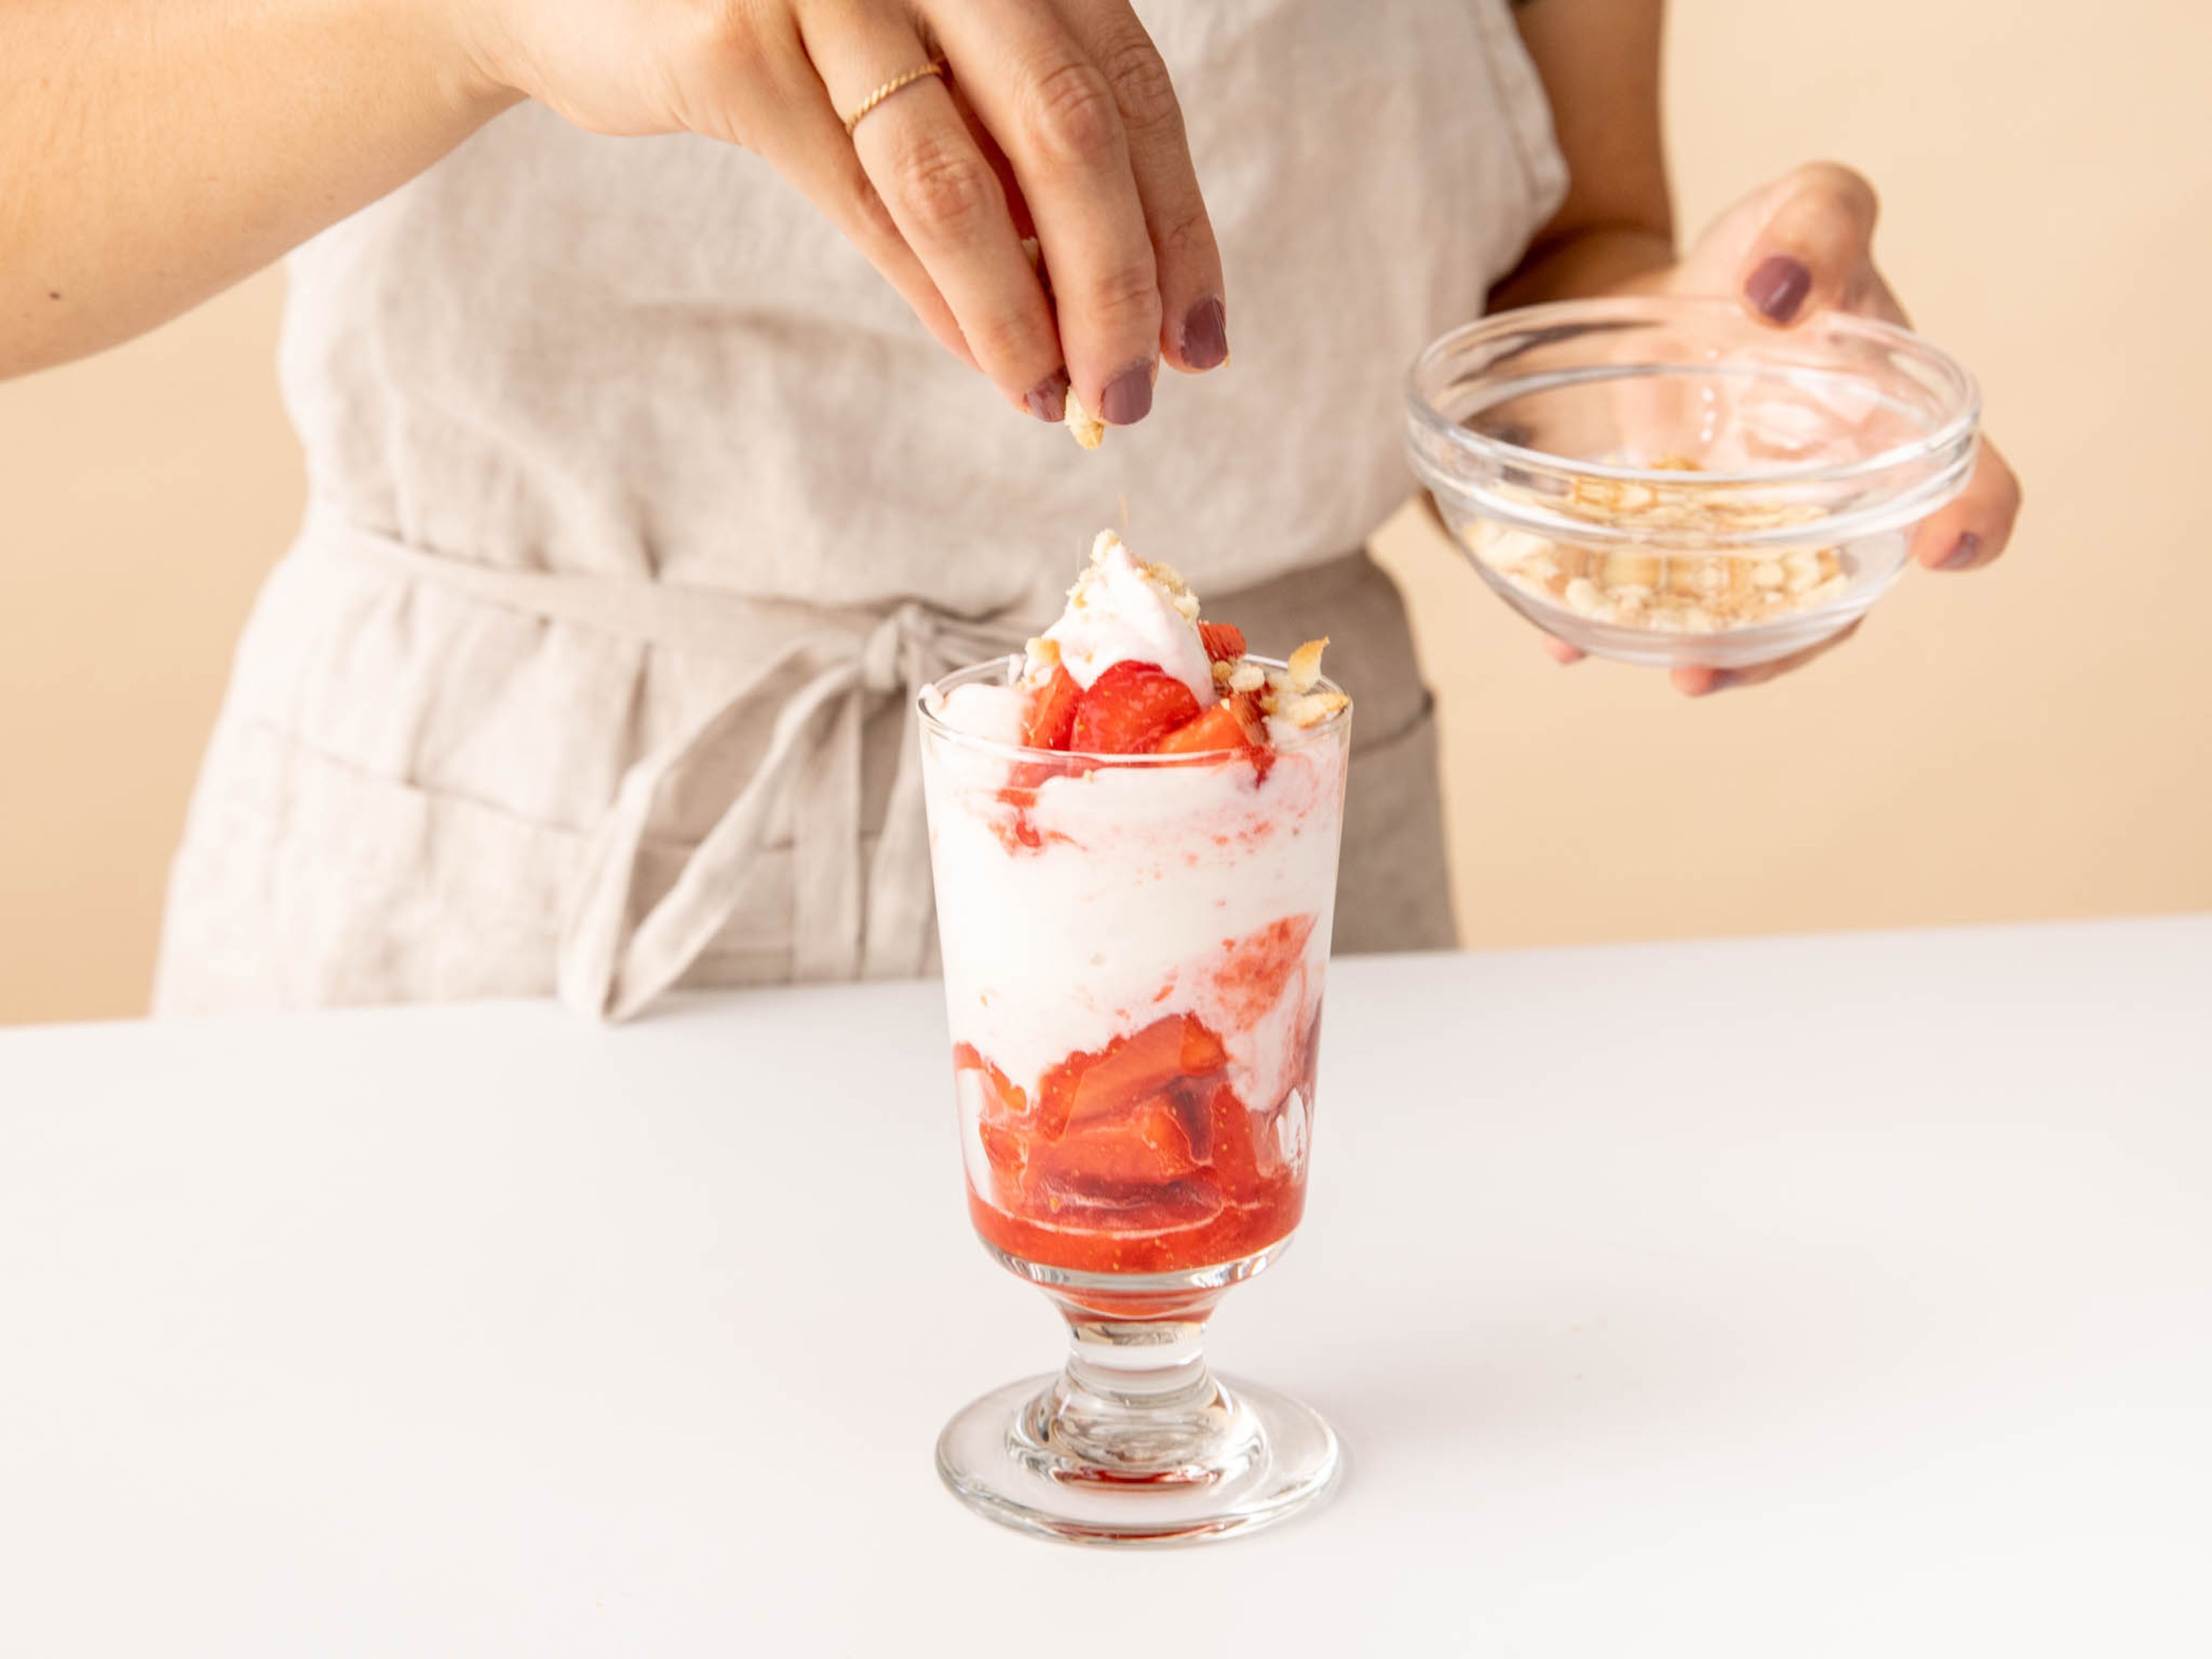 Layer remaining strawberries and strawberry whipped cream together in serving glasses. Serve immediately, or refrigerate for up to two hours before serving. Enjoy topped with crushed shortbread cookies, if desired!